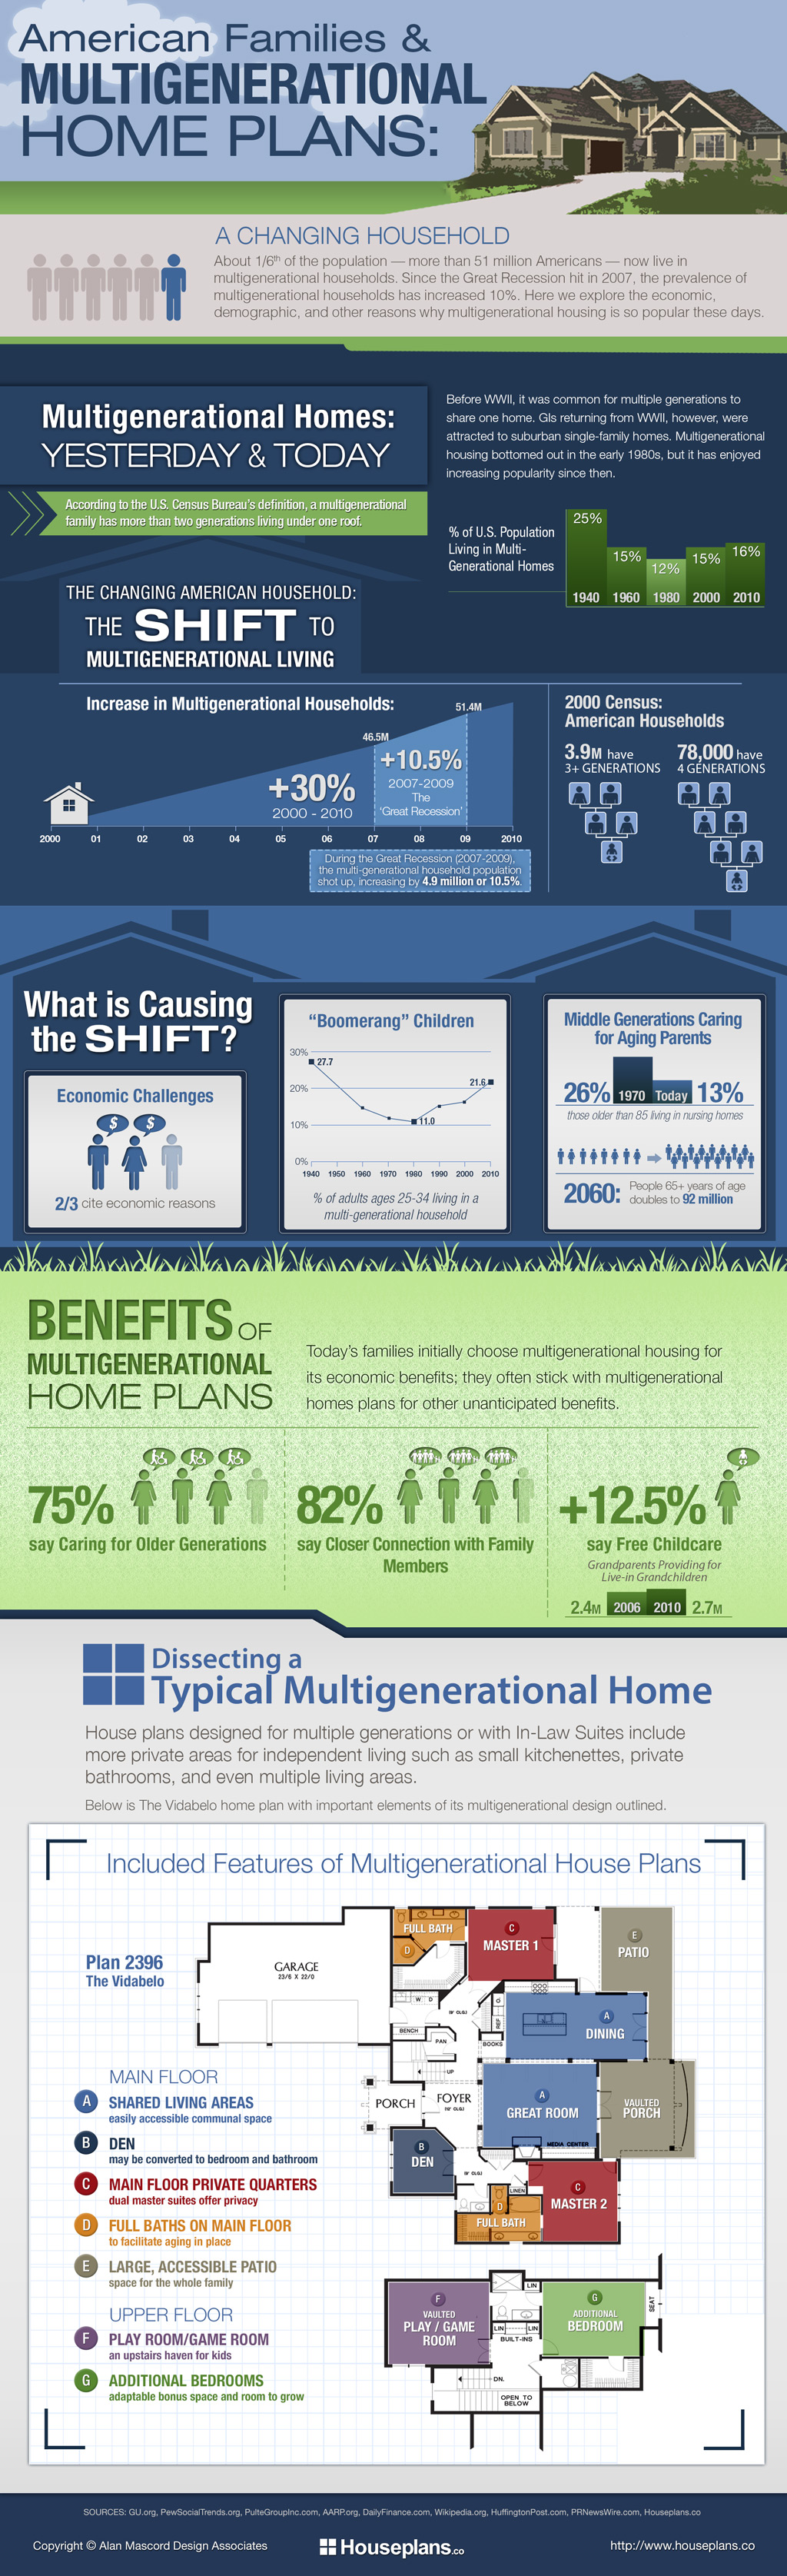 Multigenerational Home Plan Infographic by Houseplans.co